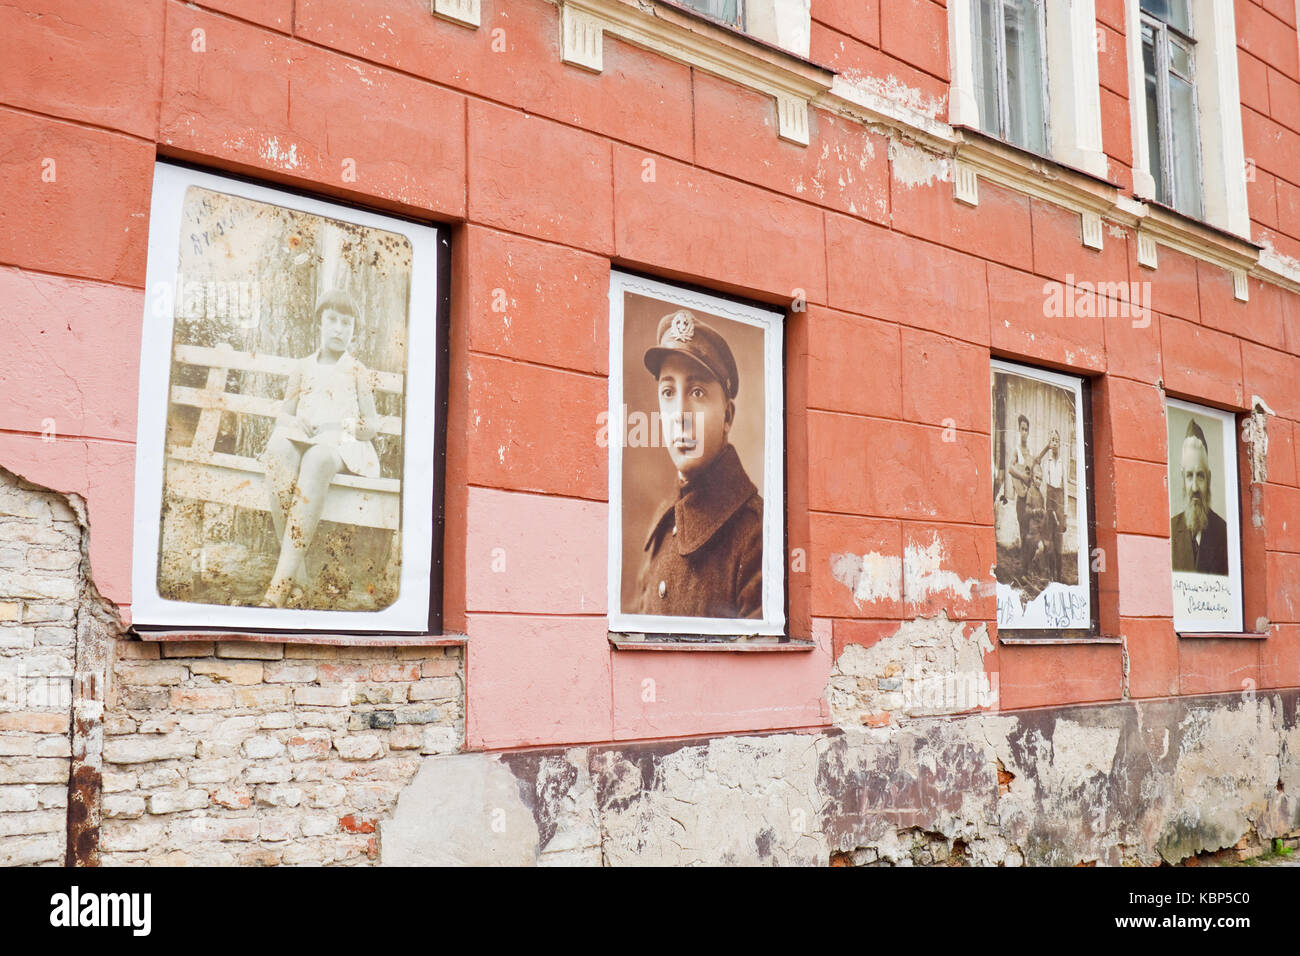 Vilnius, Lithuania - September 15, 2015: Photos discovered on the ruins of Vilnius jewish ghetto displayed in windows of a former ghetto House of cult Stock Photo